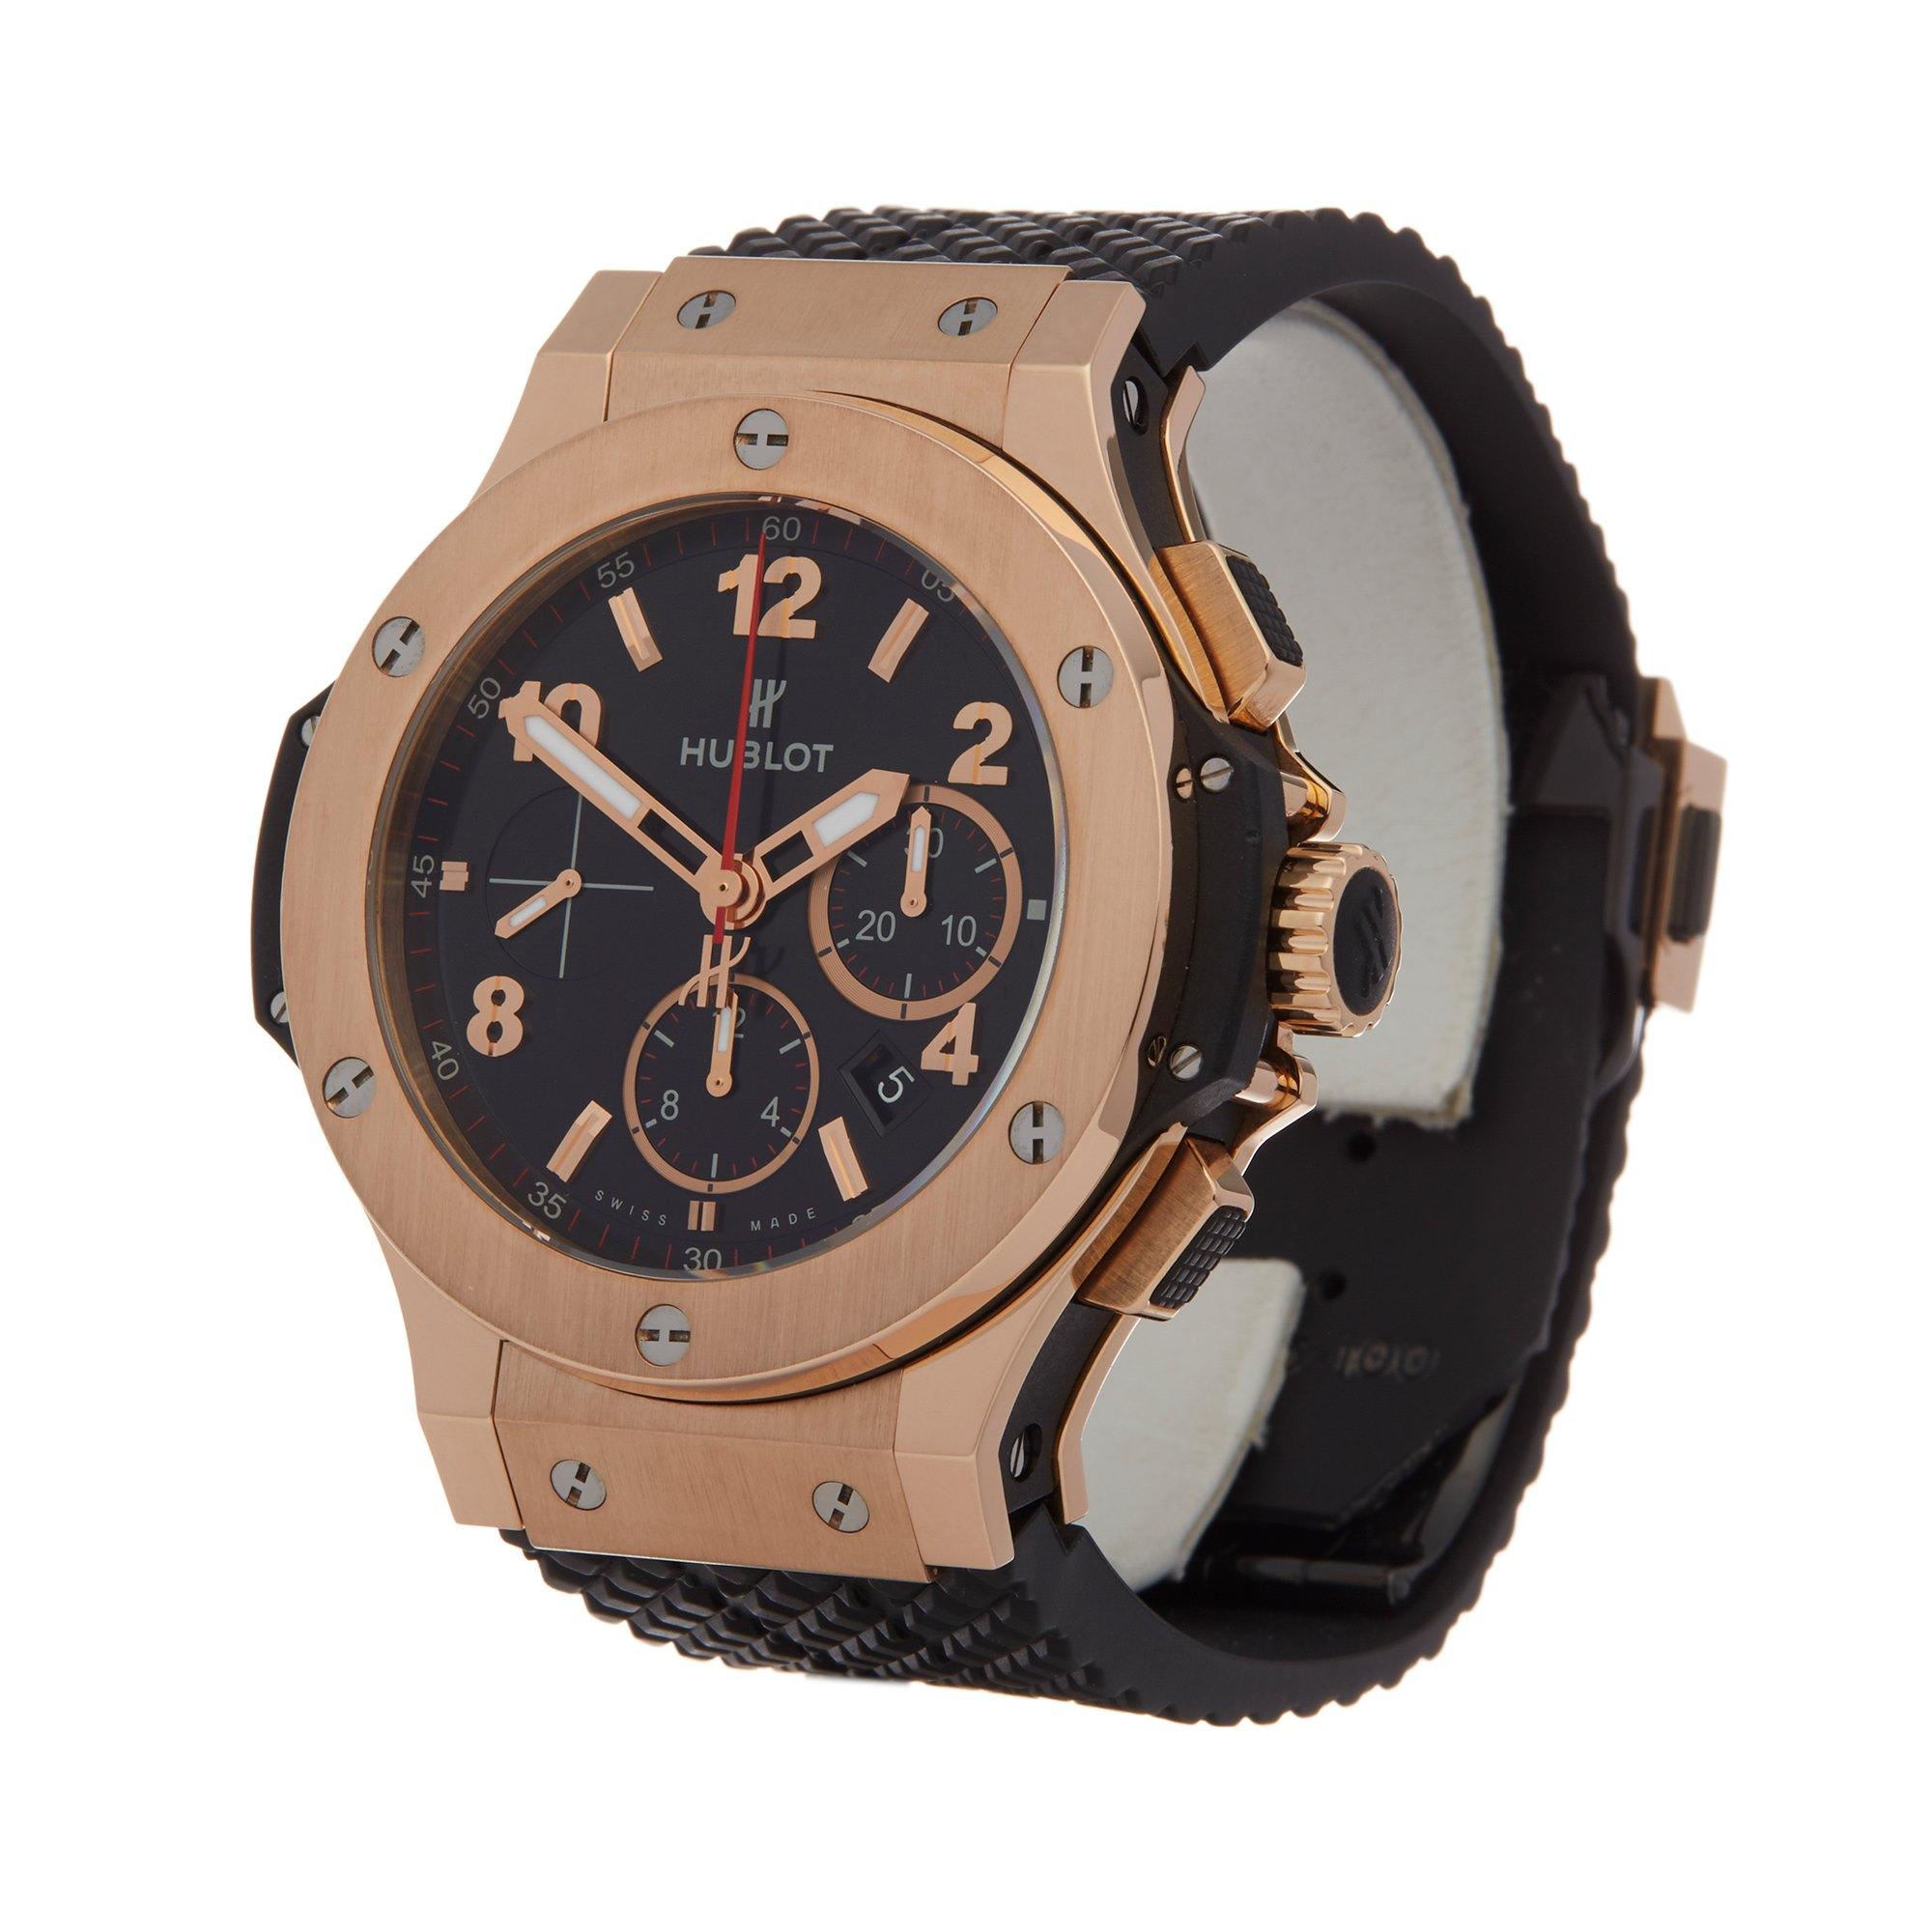 Xupes Reference: W007740
Manufacturer: Hublot
Model: Big Bang
Model Variant: 
Model Number: 301.PX.130.RX
Age: 14-01-2019
Gender: Men
Complete With: Hublot Box, Swing Tag, Case Protector & Guarantee
Dial: Black Arabic
Glass: Sapphire Crystal
Case